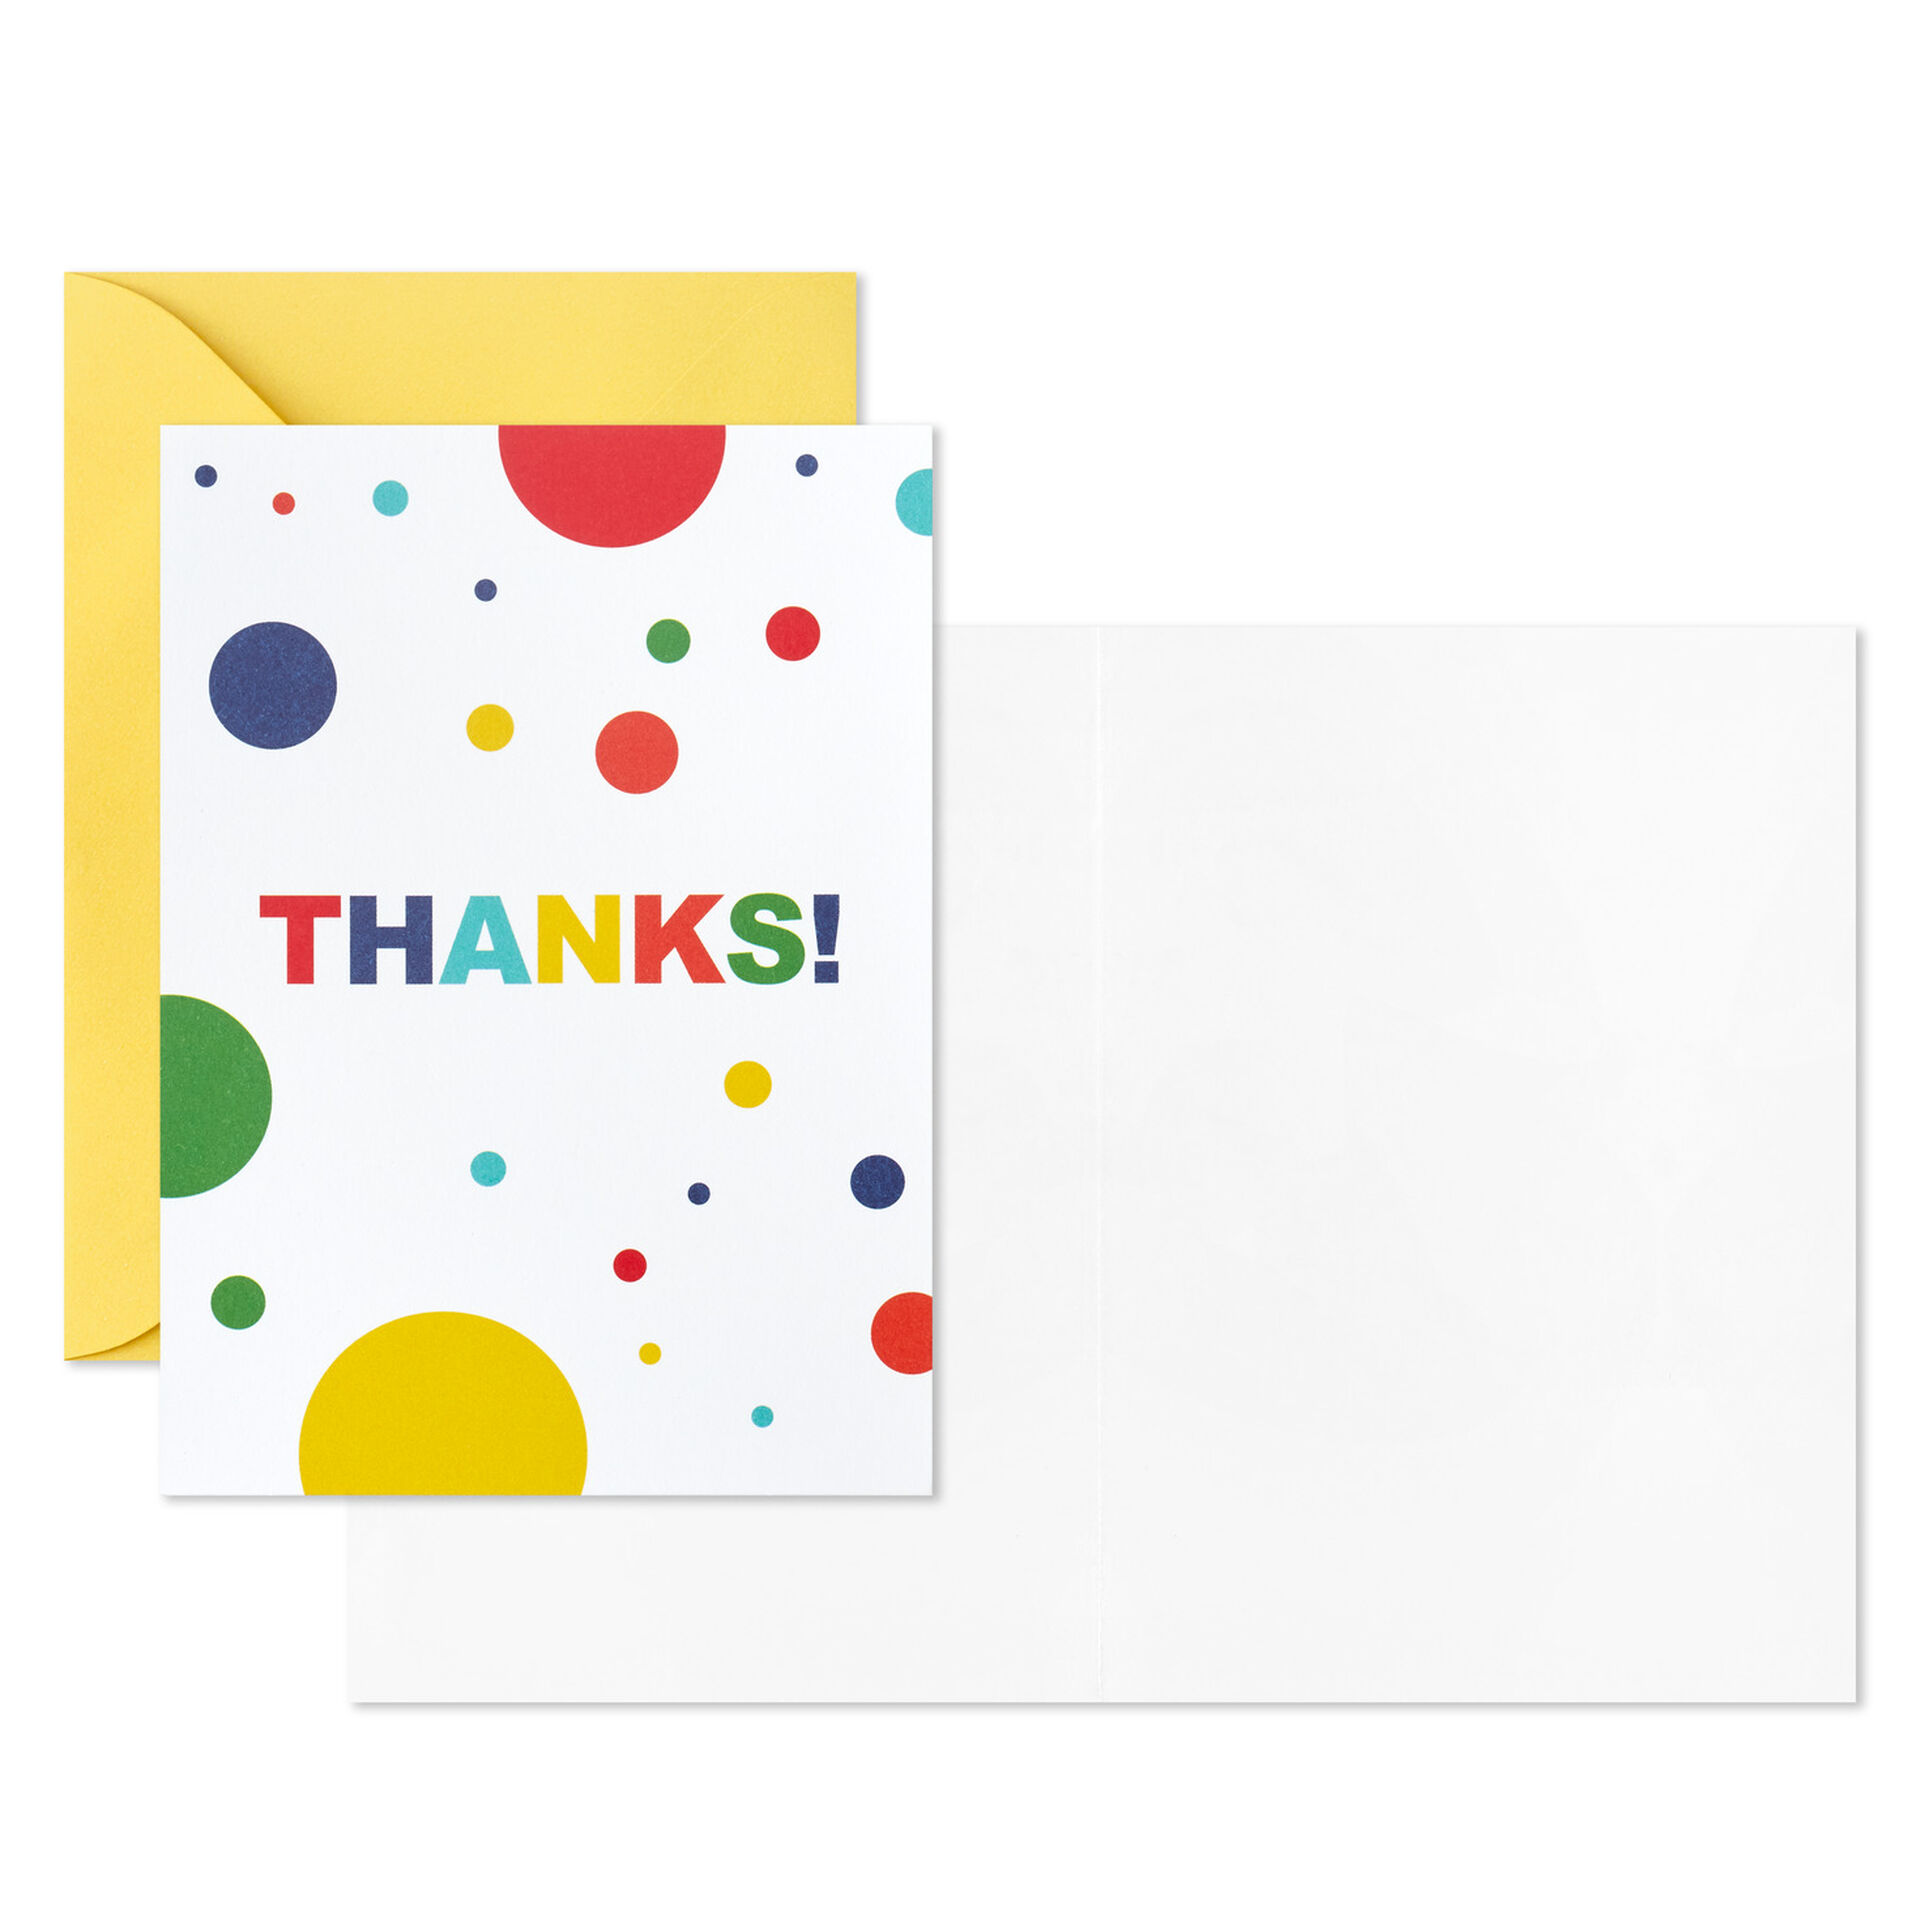 Primary-Colors-Blank-ThankYou-Notes-Assortment-Pack_5STZ1057_02